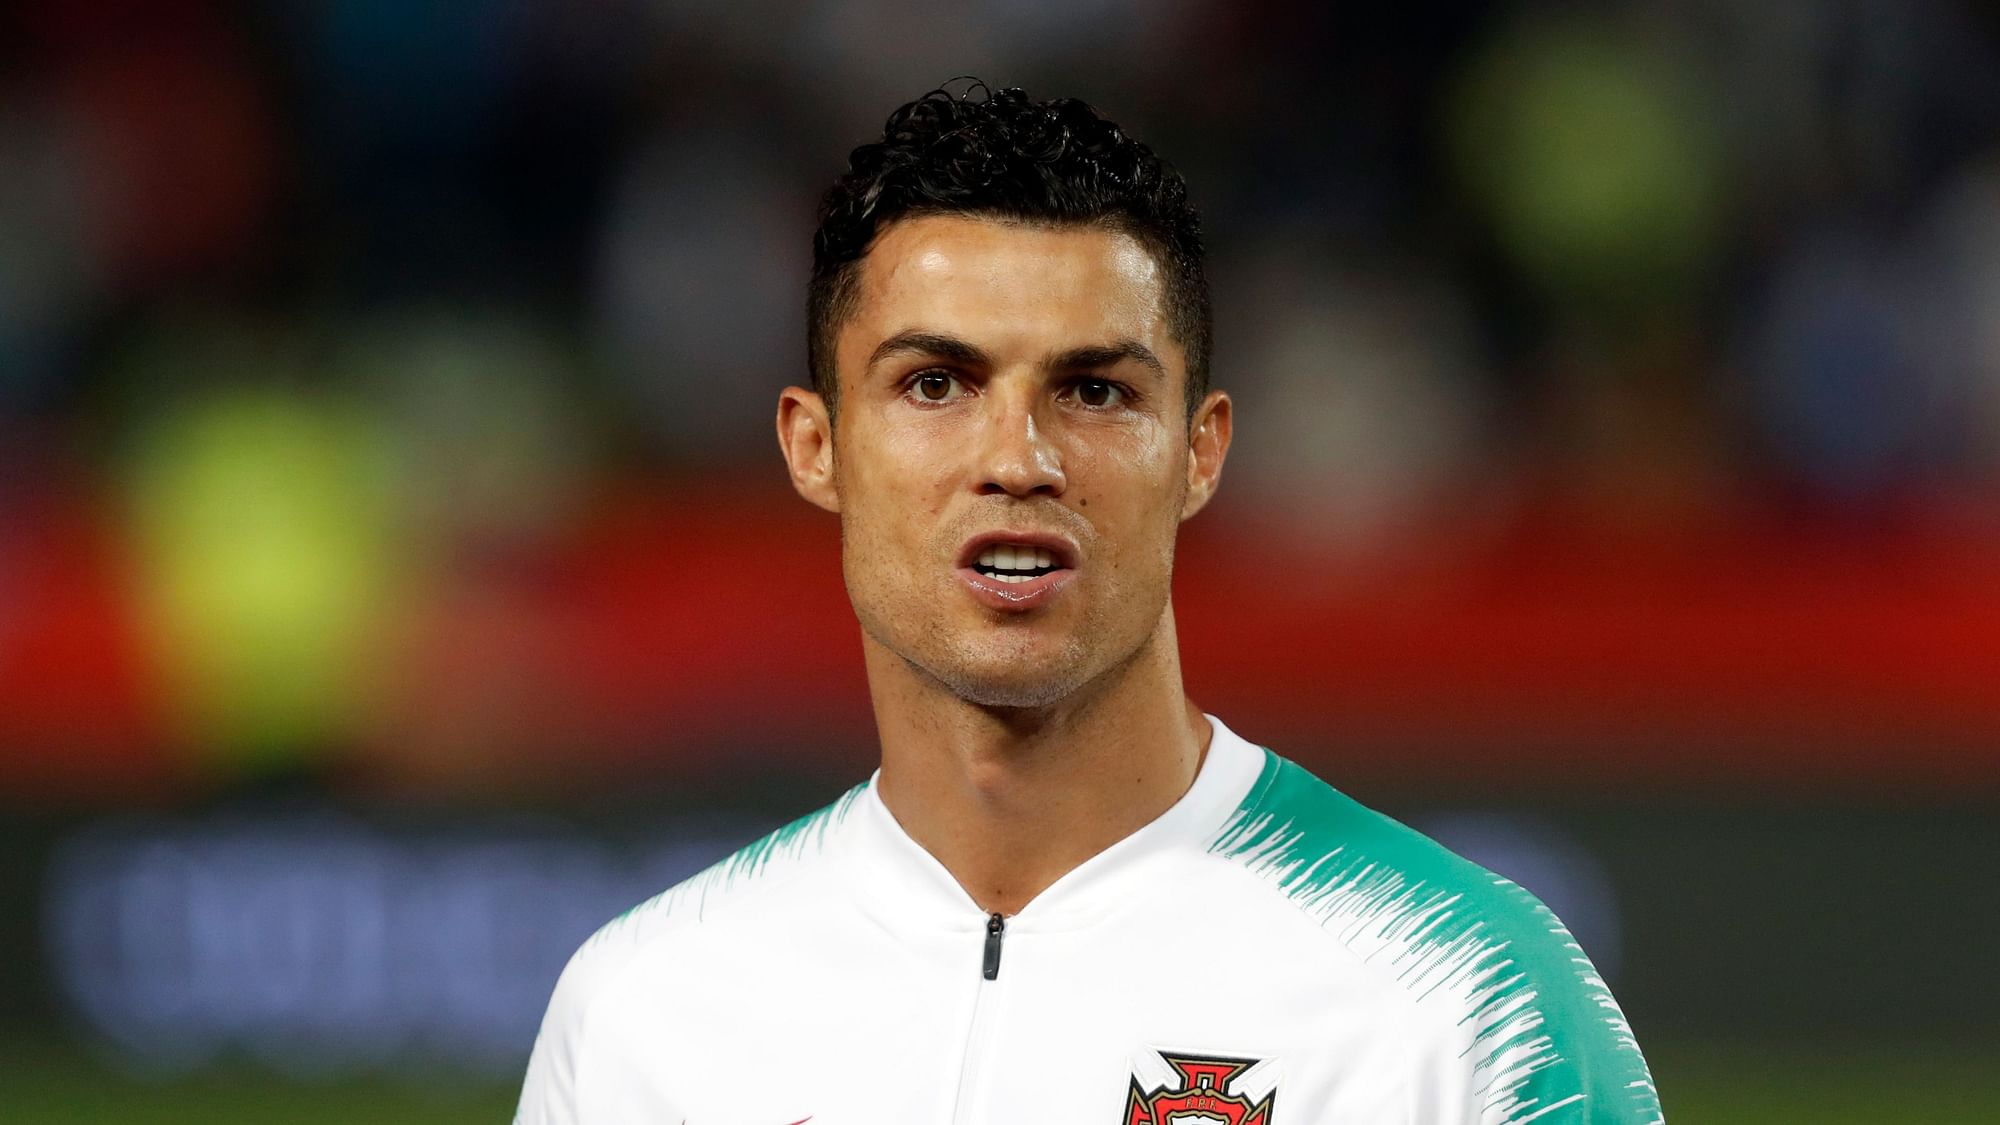 Cristiano Ronaldo’s lawyers have asked a U.S. judge  to either dismiss a Nevada woman’s rape lawsuit or to order closed-door settlement talks.